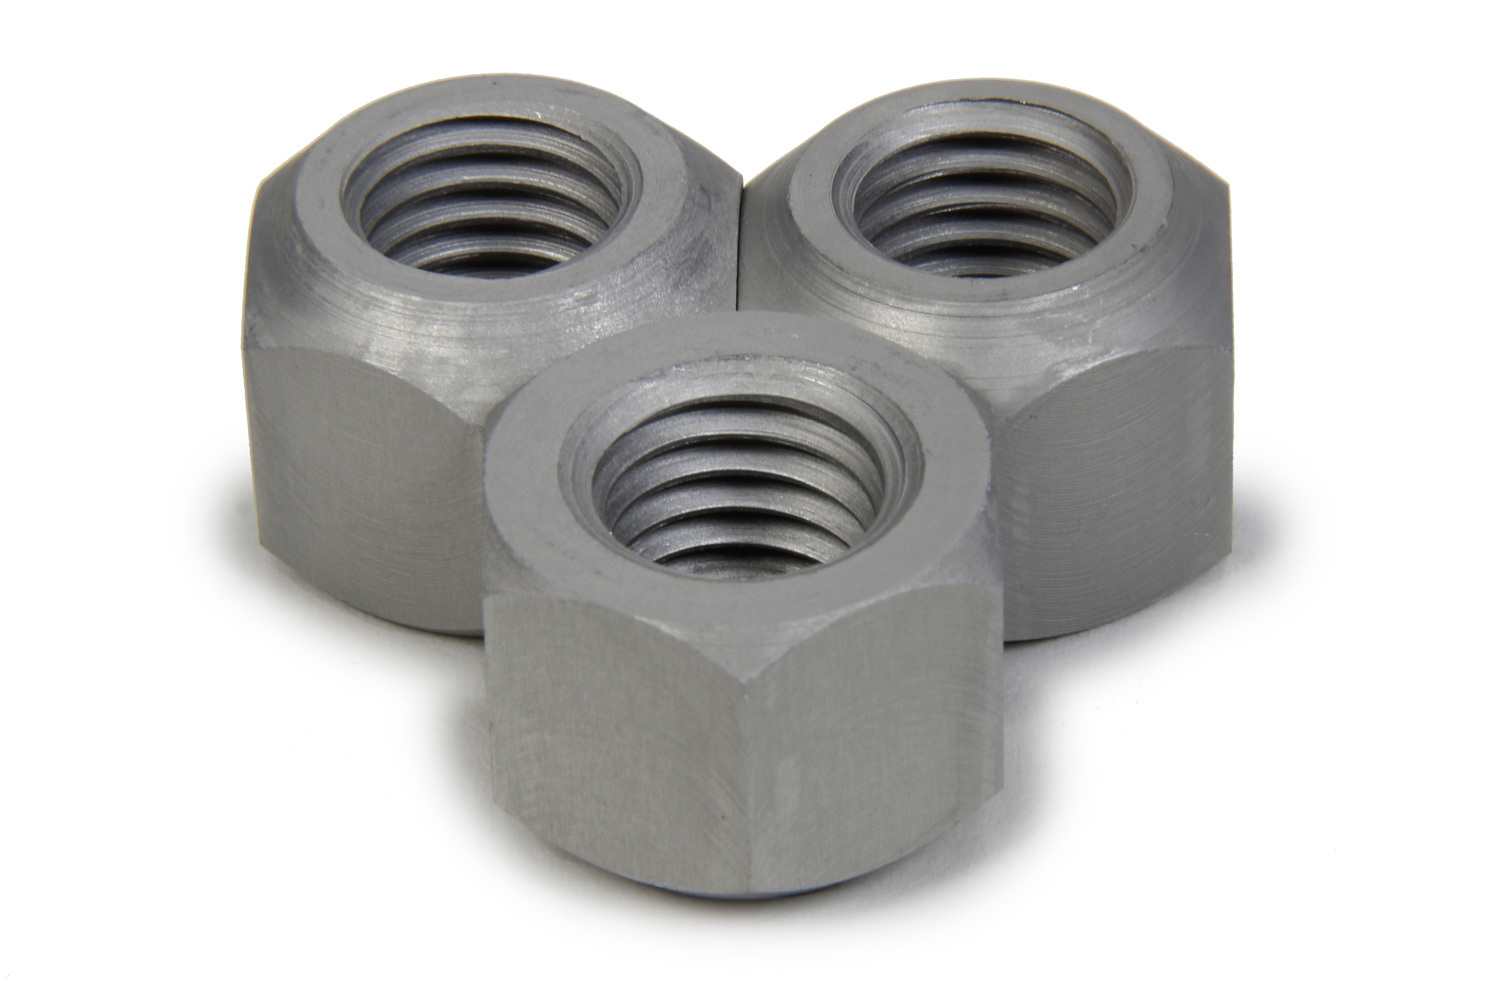 MPD Racing 17015 Lug Nut, 5/8 in Right Hand Thread, Aluminum, Natural, 6 Pin Sprint Car, Set of 3